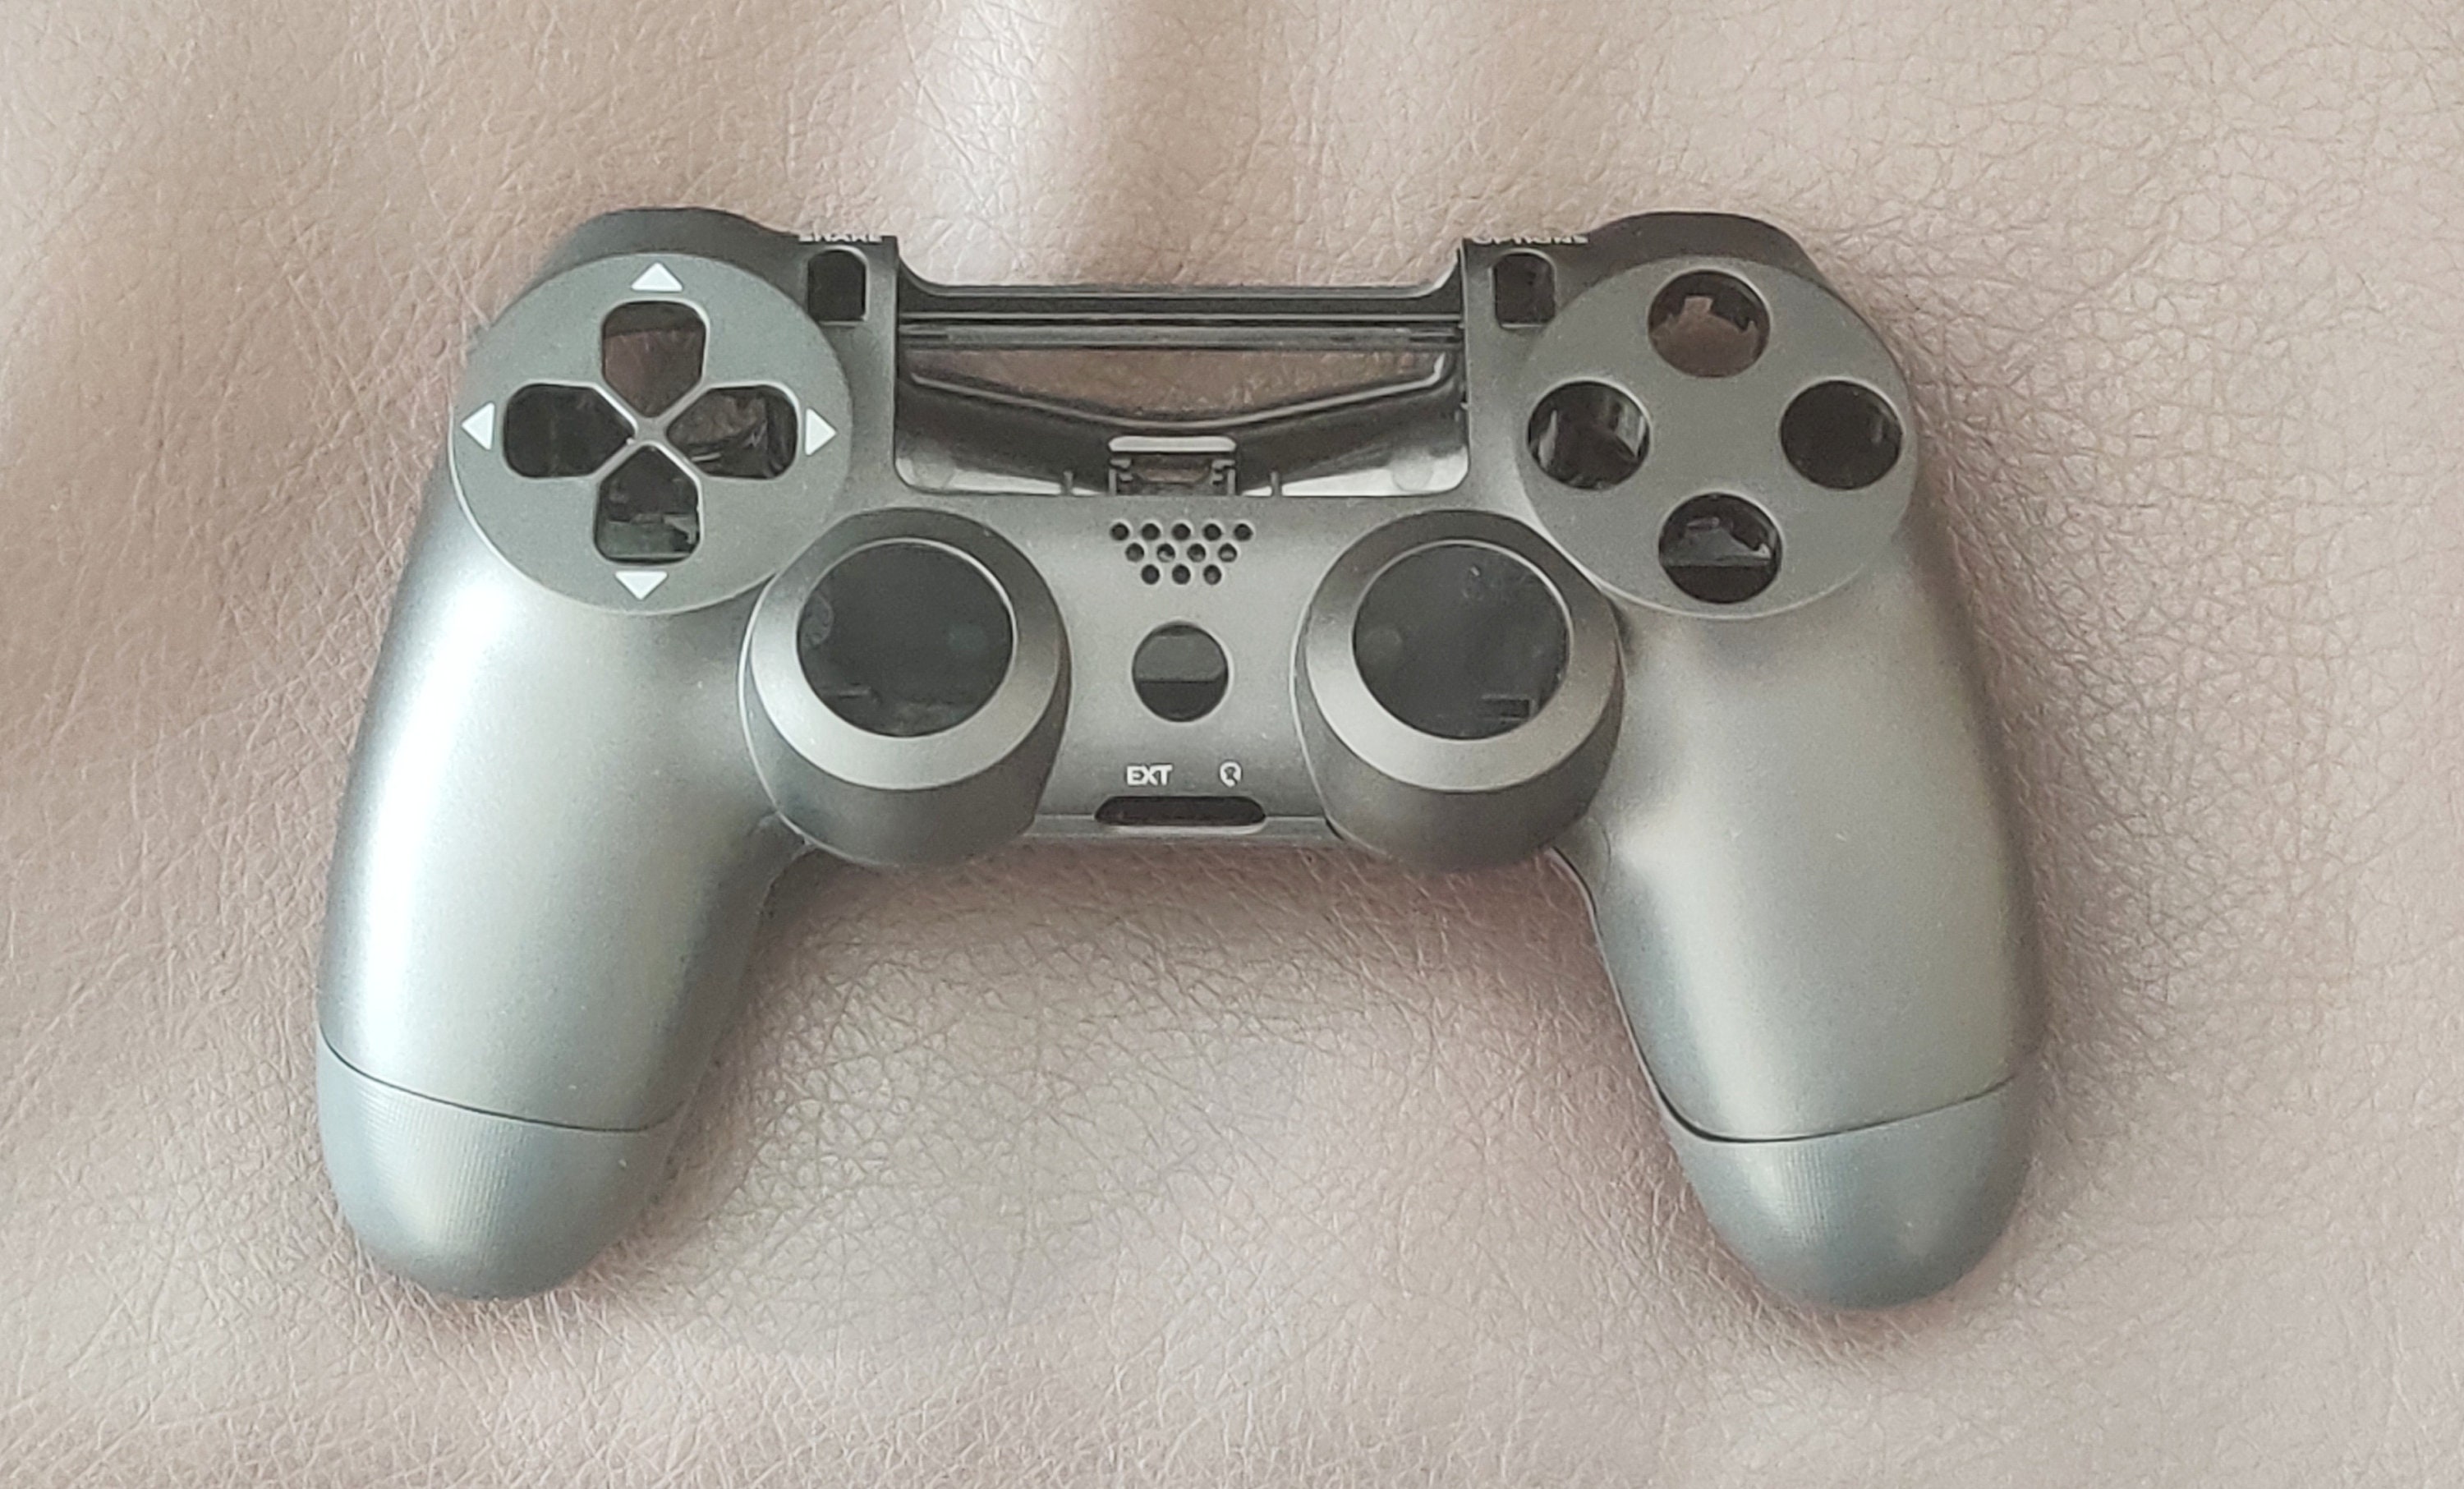 Buy Authentic Black Shell PS4 Generation 2 Controller Online in Etsy